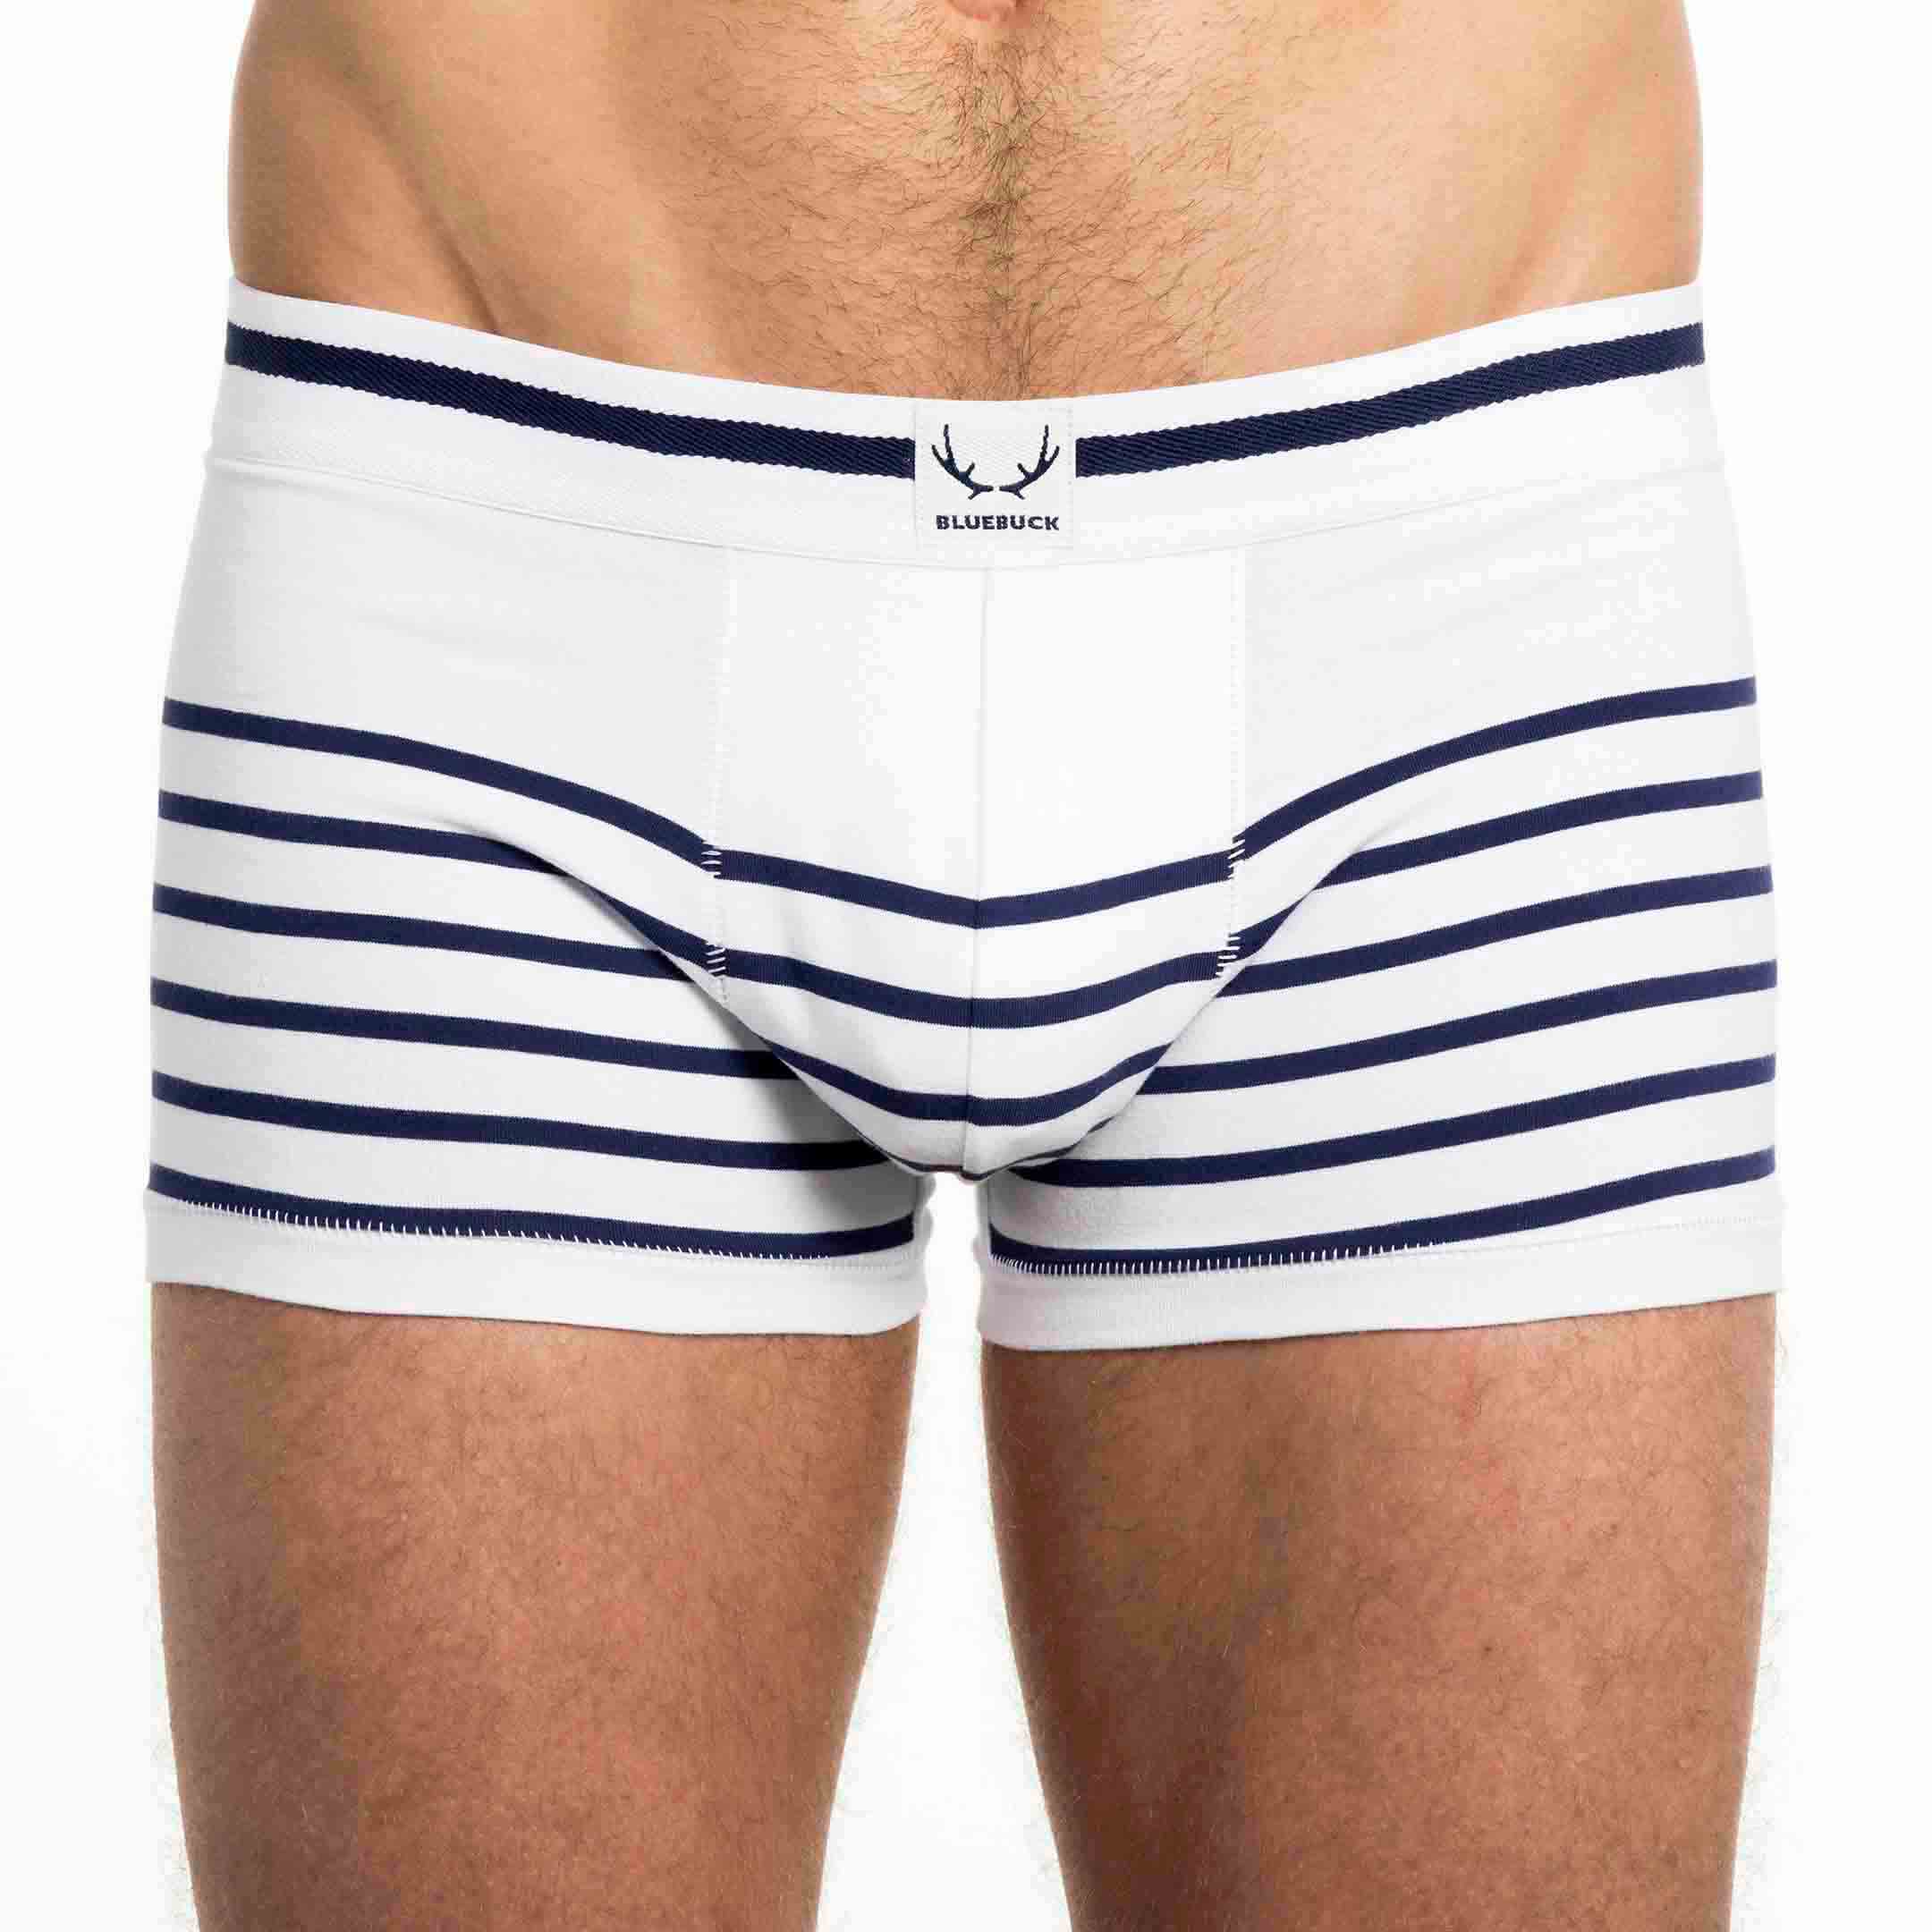 Black and white striped boxer shorts made of organic cotton from Bluebuck